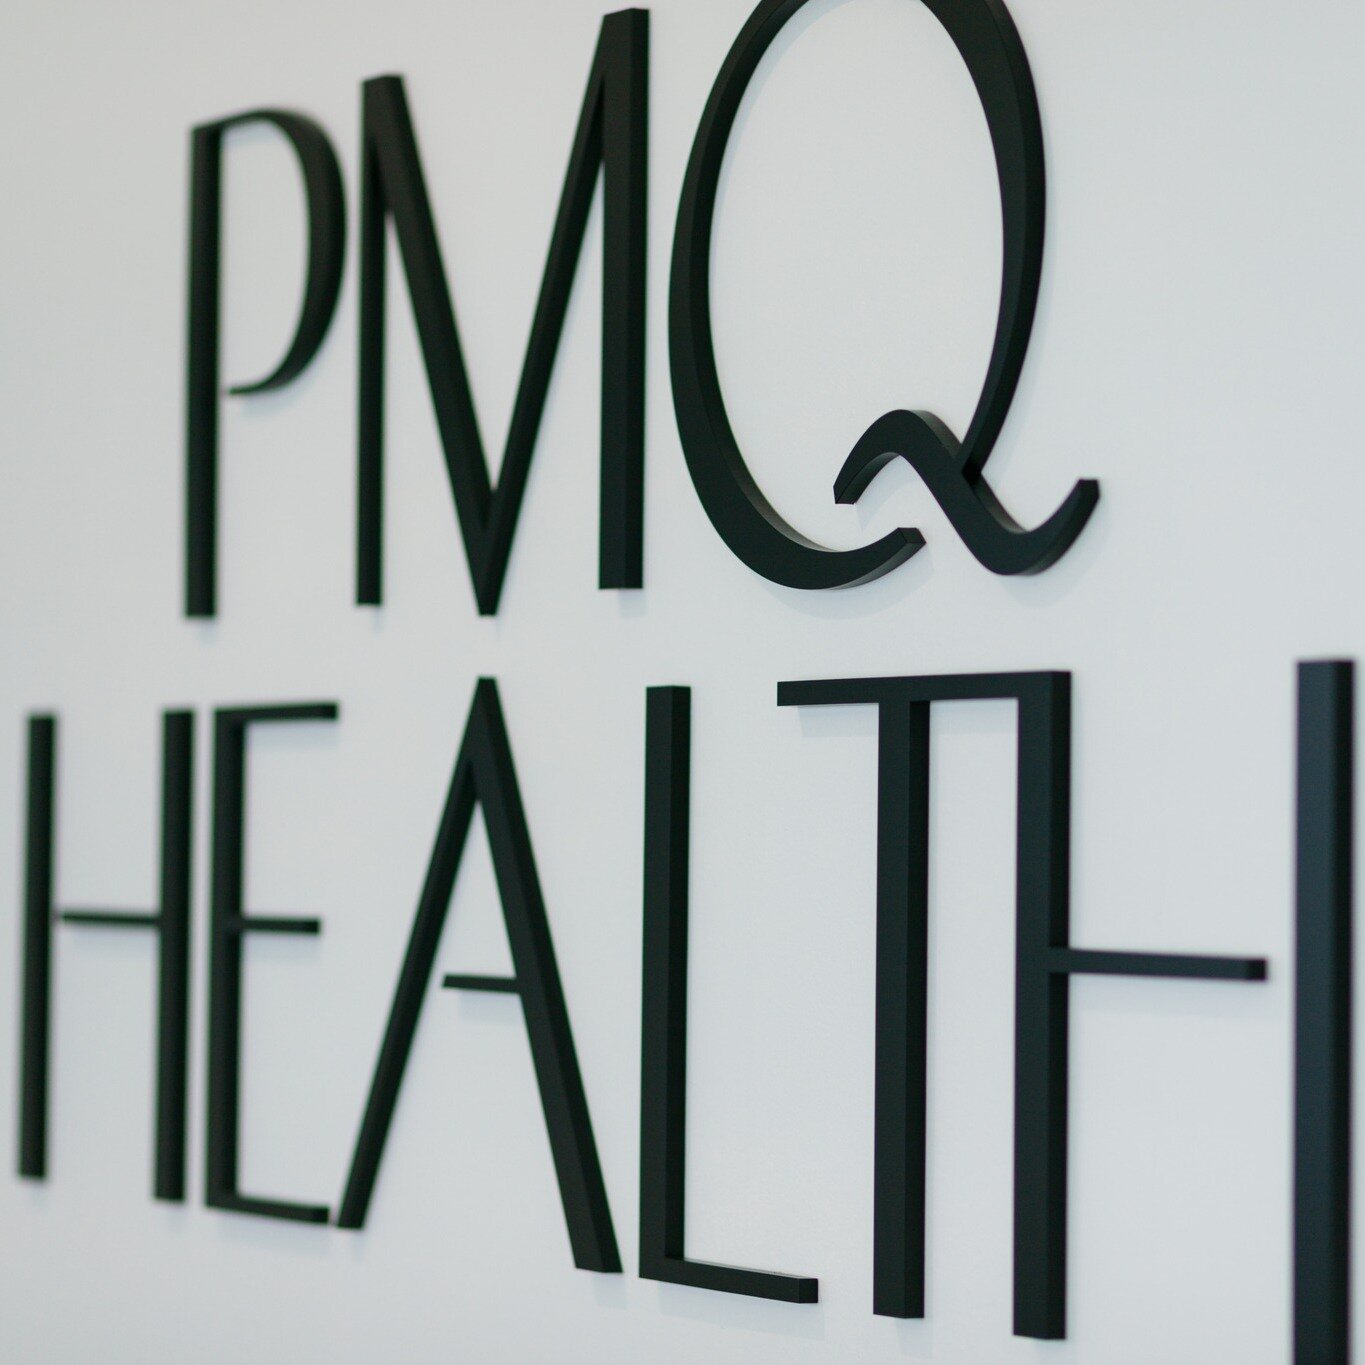 IT'S FINALLY HERE! 📣
PMQ HEALTH MEMBERSHIP

Introducing our Membership option 👏

We're thrilled to offer you the opportunity to take your Health journey to the next level with our membership package. 

Membership Includes:

✨ Unlimited Pilates Clas